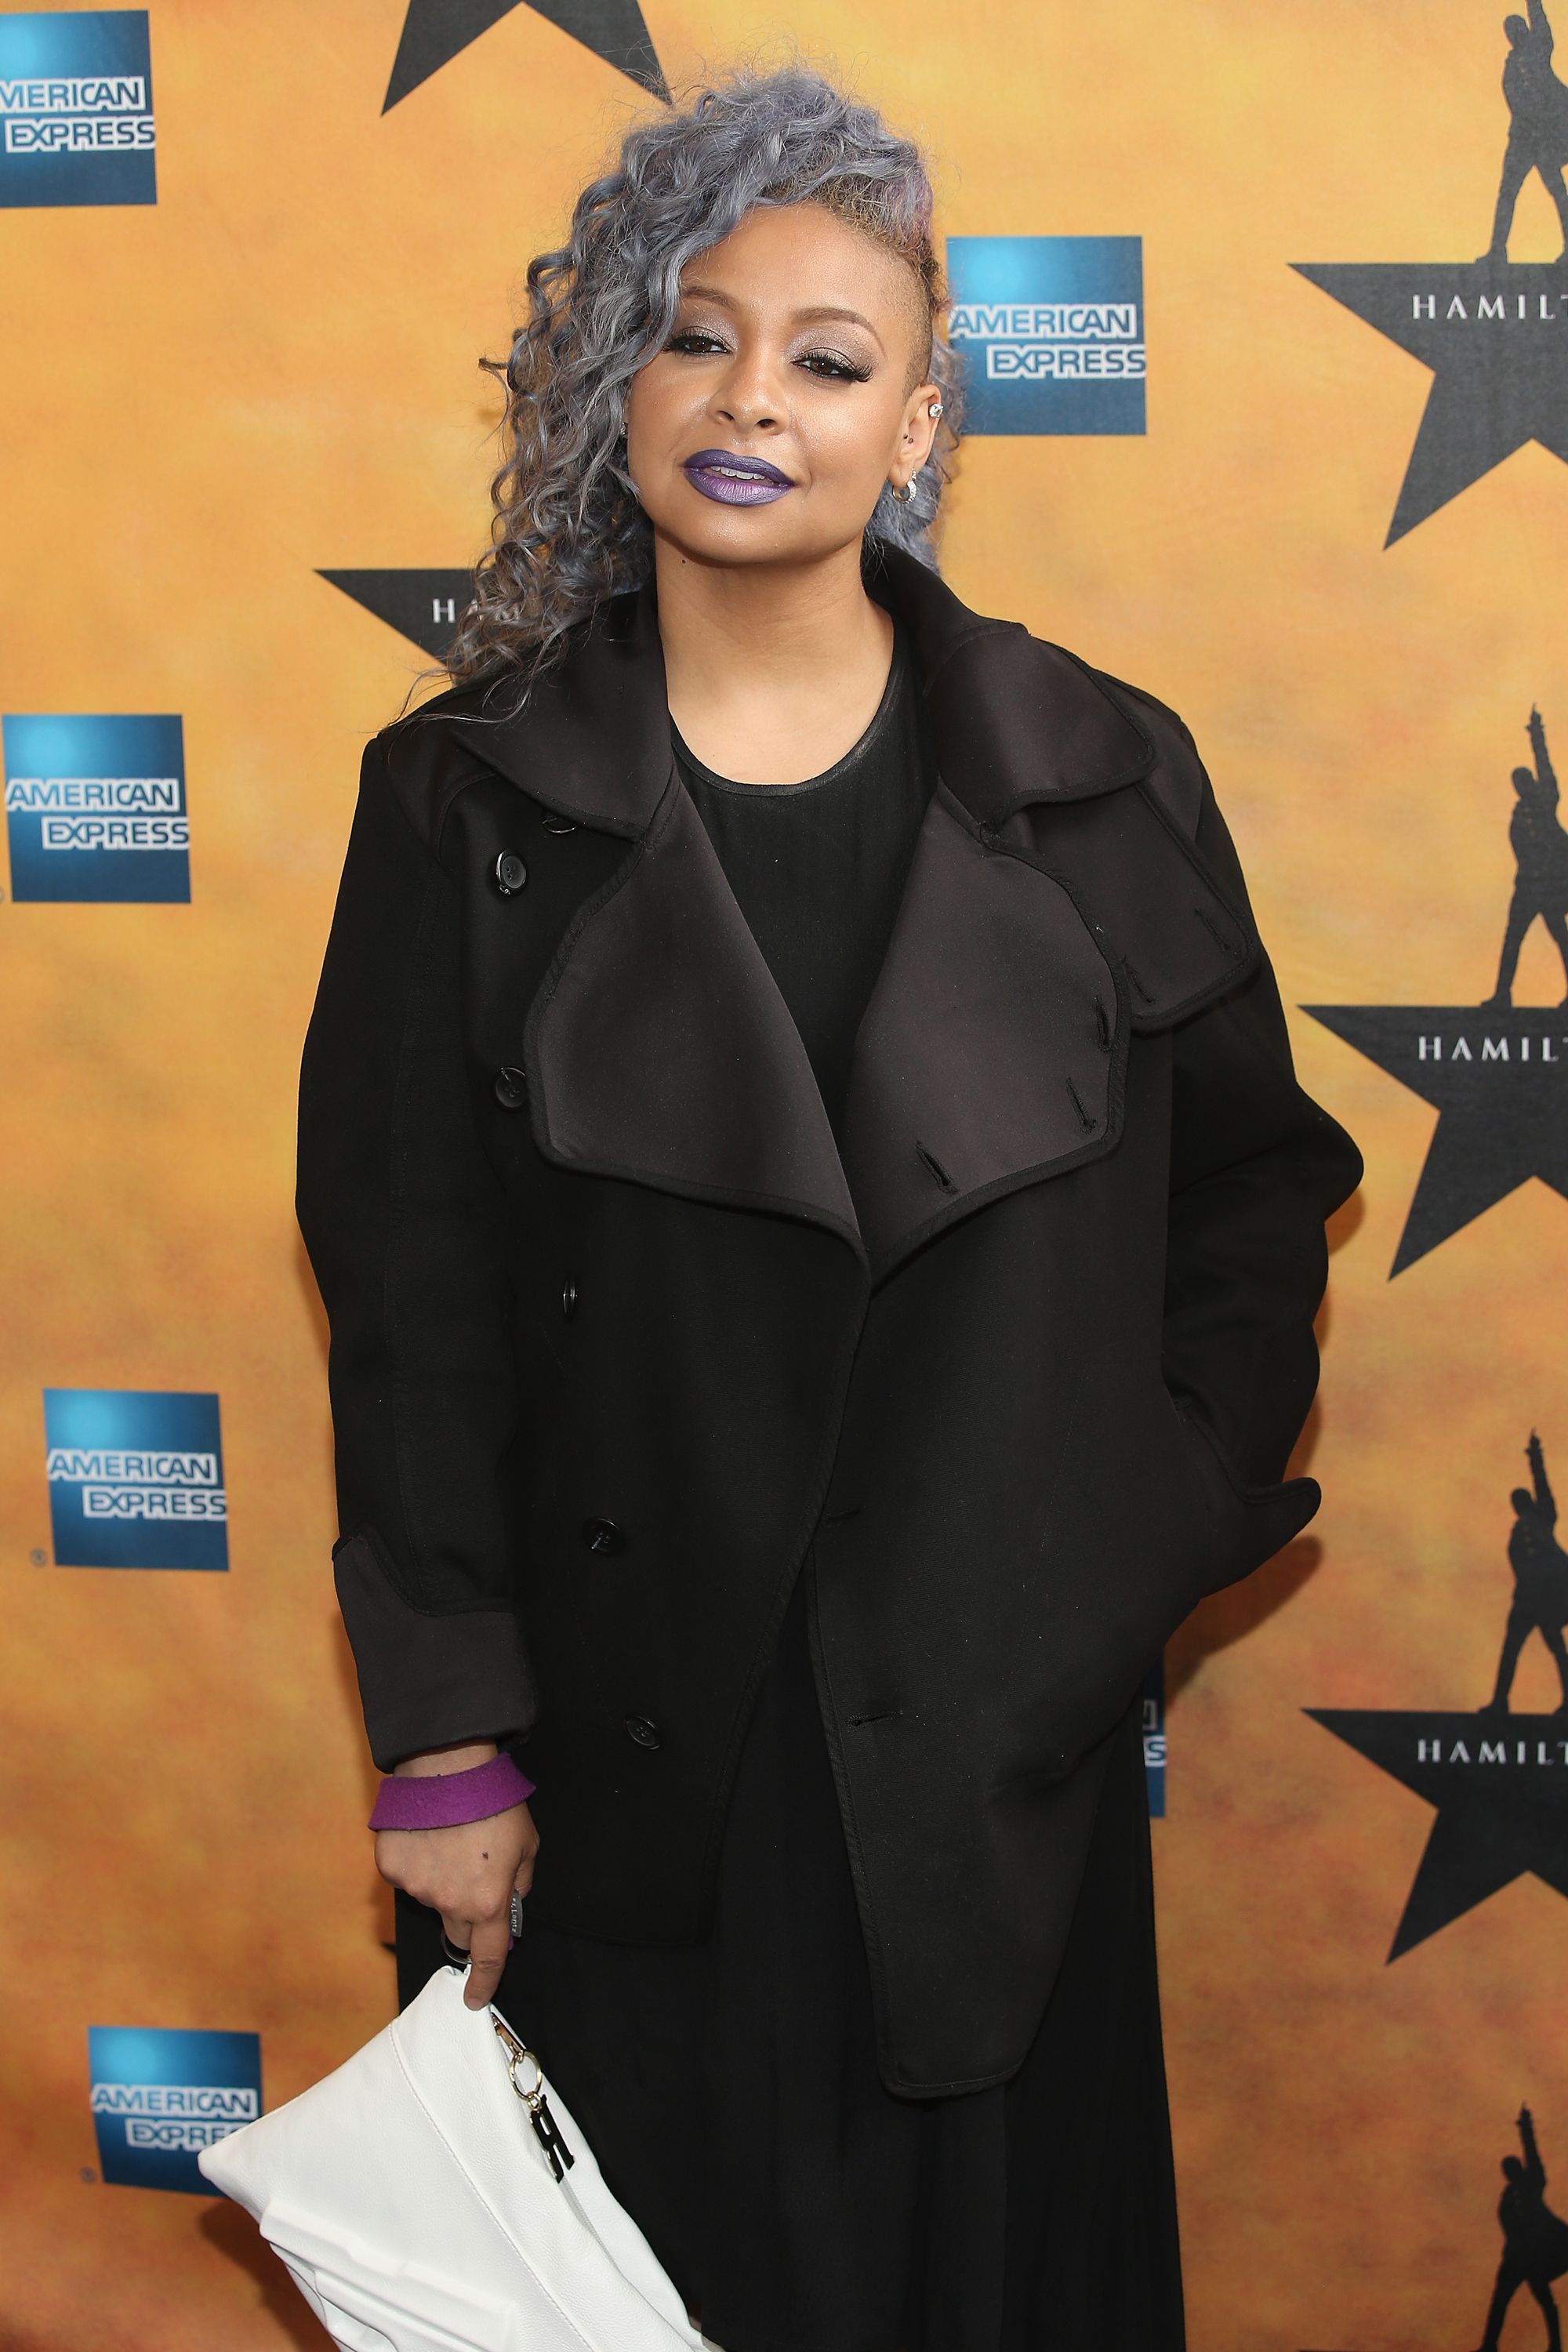 Raven-Symone at the "Hamilton" Broadway Opening Night at Richard Rodgers Theatre on August 6, 2015 in New York City | Photo: Getty Images  